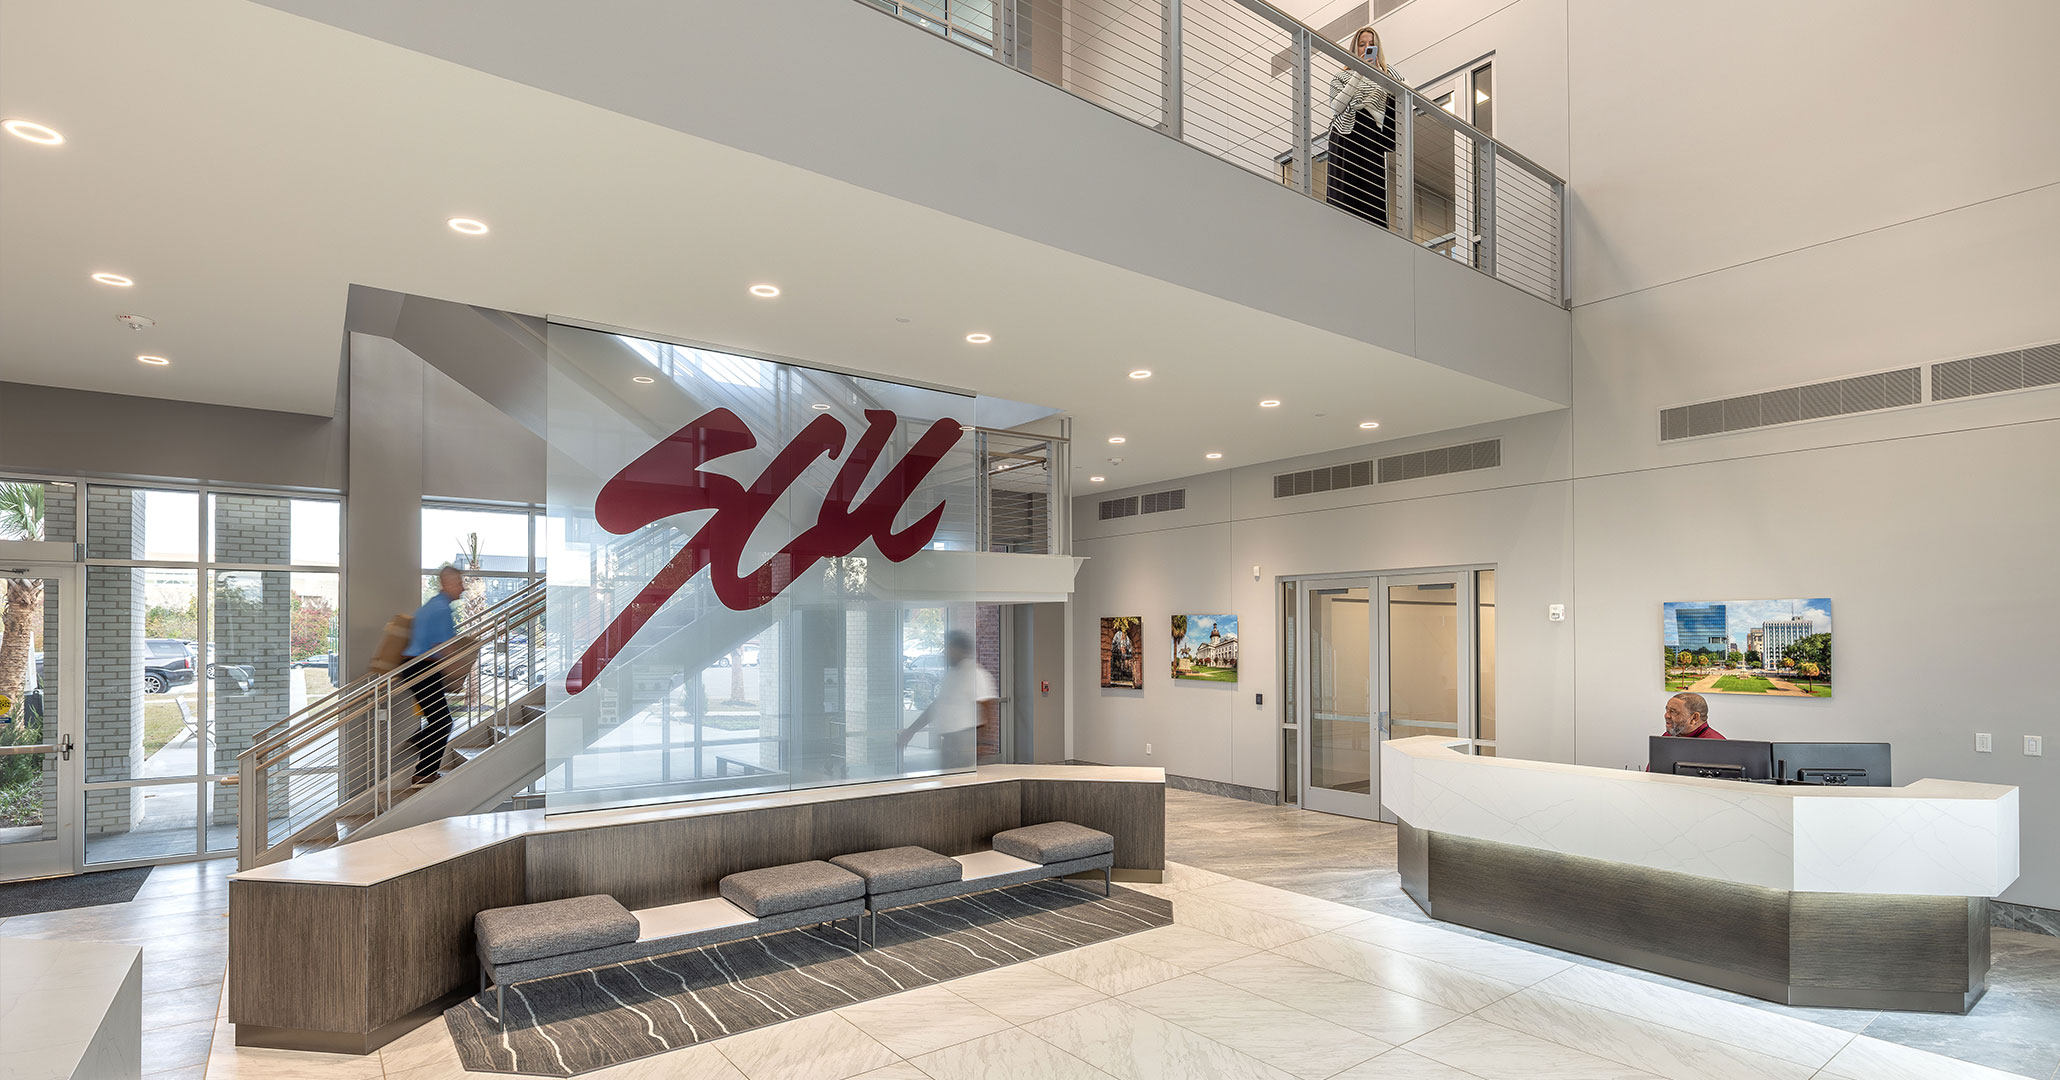 The new SCU Headquarters entryway design features a light-filled stairwell designed by BOUDREAUX architects.